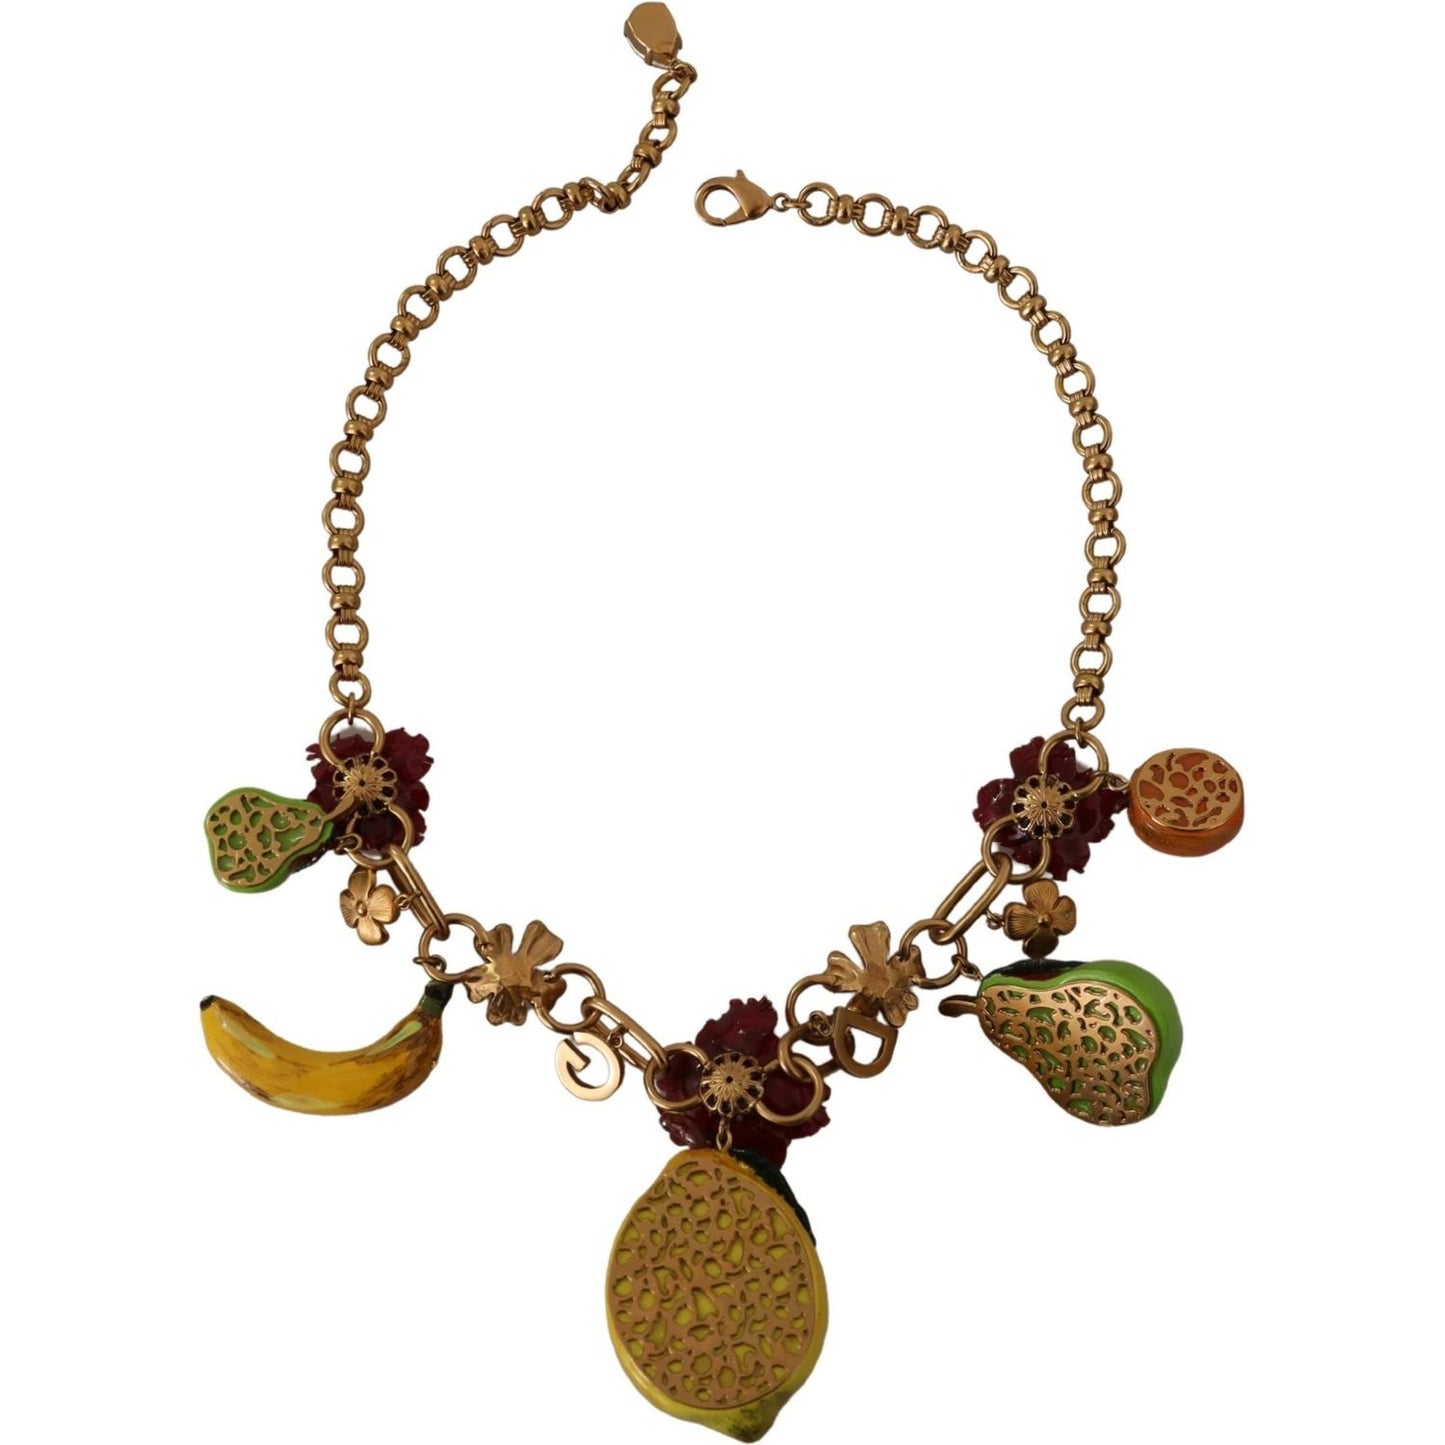 Dolce & Gabbana Chic Gold Statement Sicily Fruit Necklace gold-brass-sicily-fruits-roses-statement-necklace WOMAN NECKLACE IMG_1914-scaled-f2648f9e-846.jpg